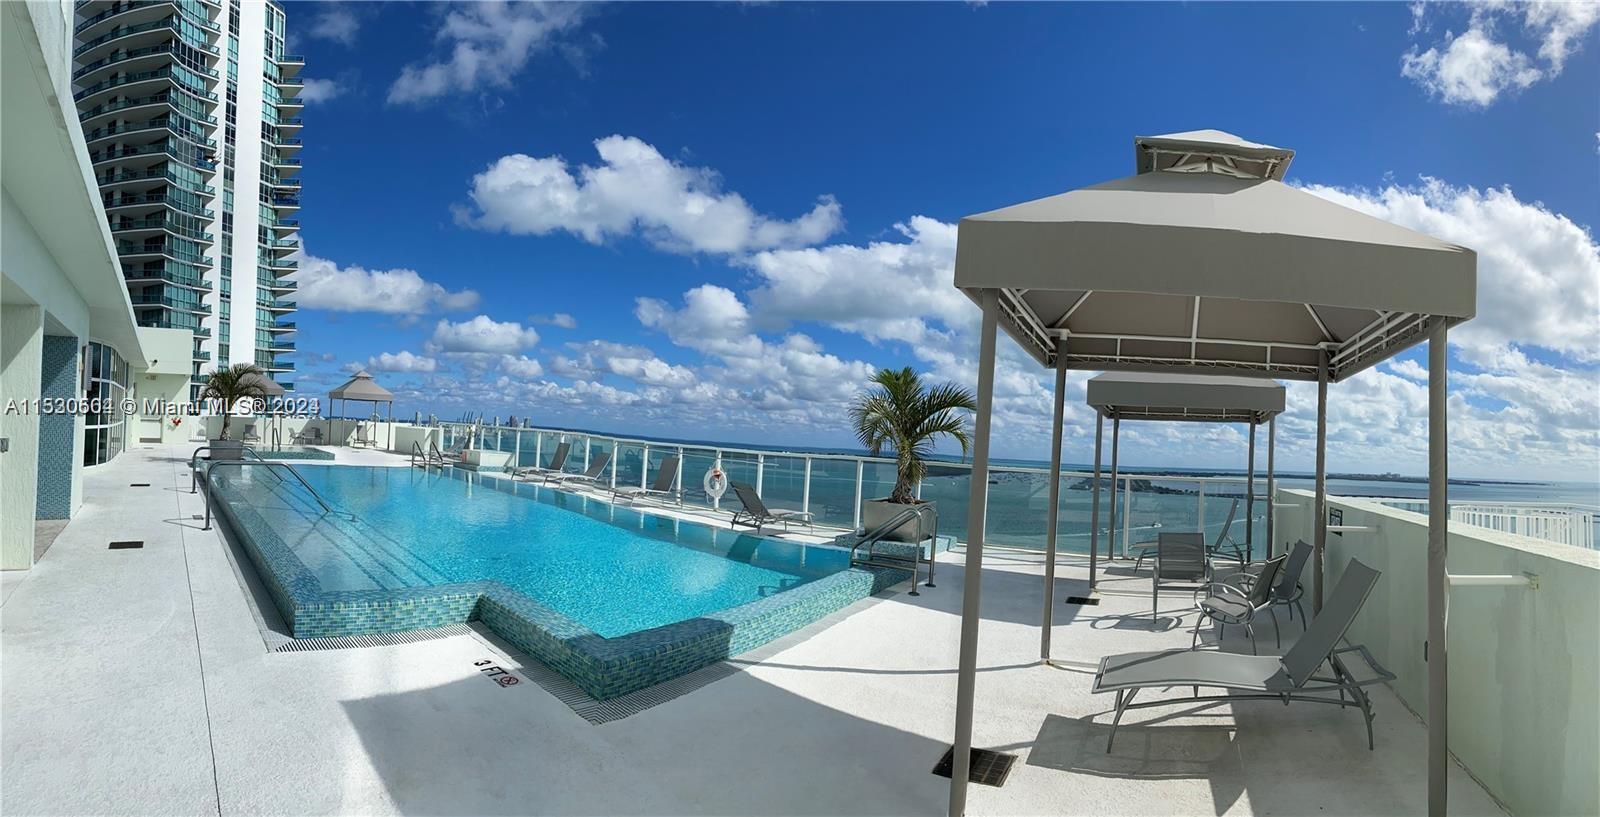 Rare opportunity -an extravagantly furnished 1bedroom,1 bathroom dwelling located within one of Brickell's most desirable neighborhoods.The Emerald at Brickell showcases a modish boutique style of living, offering premium amenities including a resort-style rooftop infinity pool with panoramic views of the bay, spa, cabanas, fully equipped fitness center, office suite, 24hr security/concierge,valet parking. Walking distance from Mary Brickell, Brickell City Centre, and more. Additional features include custom Scavolini kitchen cabinets, Sub-Zero refrigerator, granite countertop, floor-to-ceiling high-impact sliding glass doors, updated bathroom fixtures with marble throughout, jacuzzi tub, washer and dryer, walk-in closet, stylish personal office. Storage unit is included.  Available May15.